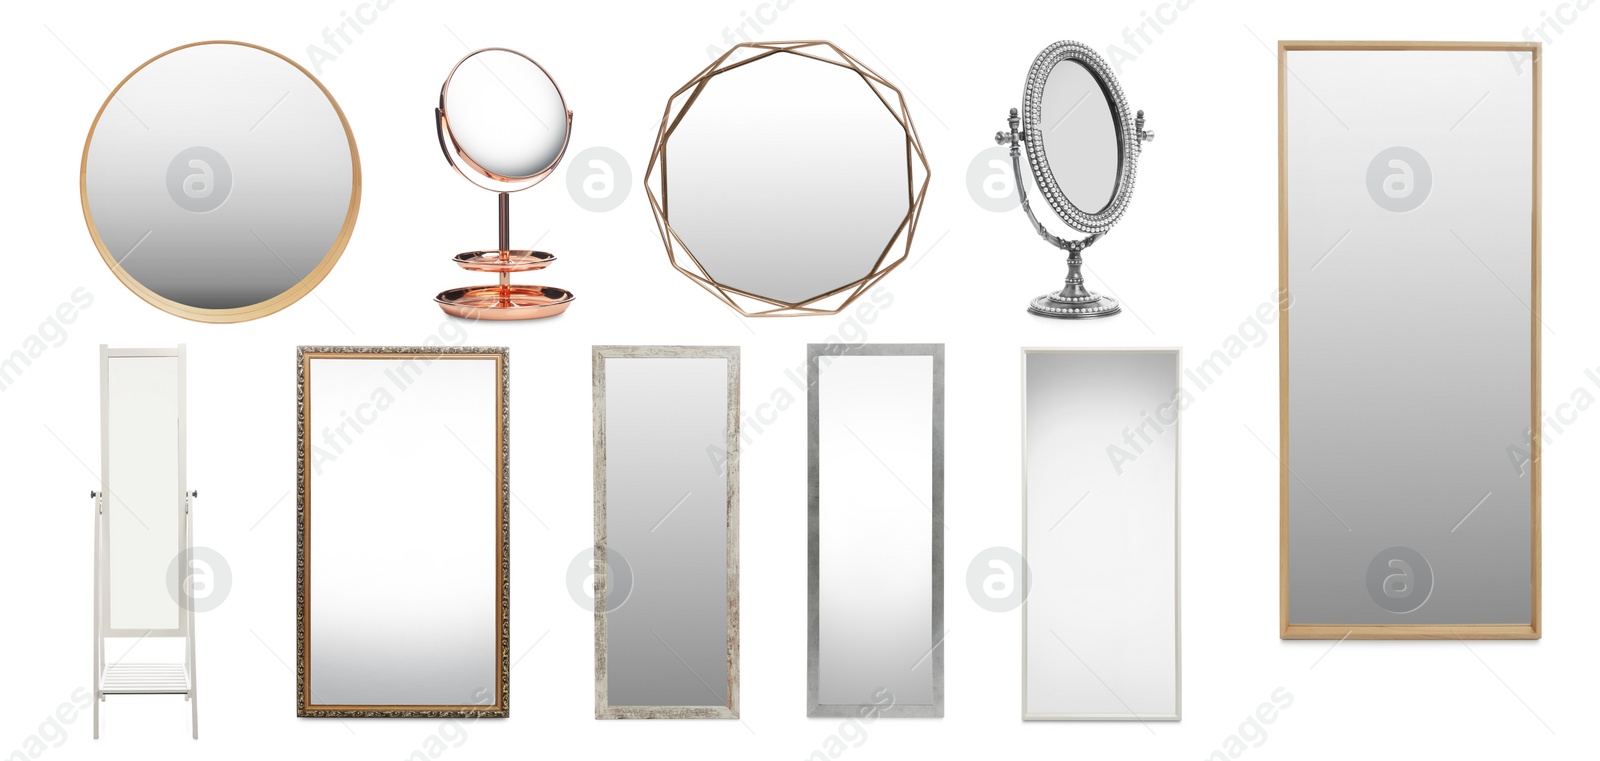 Image of Set of different stylish mirrors on white background